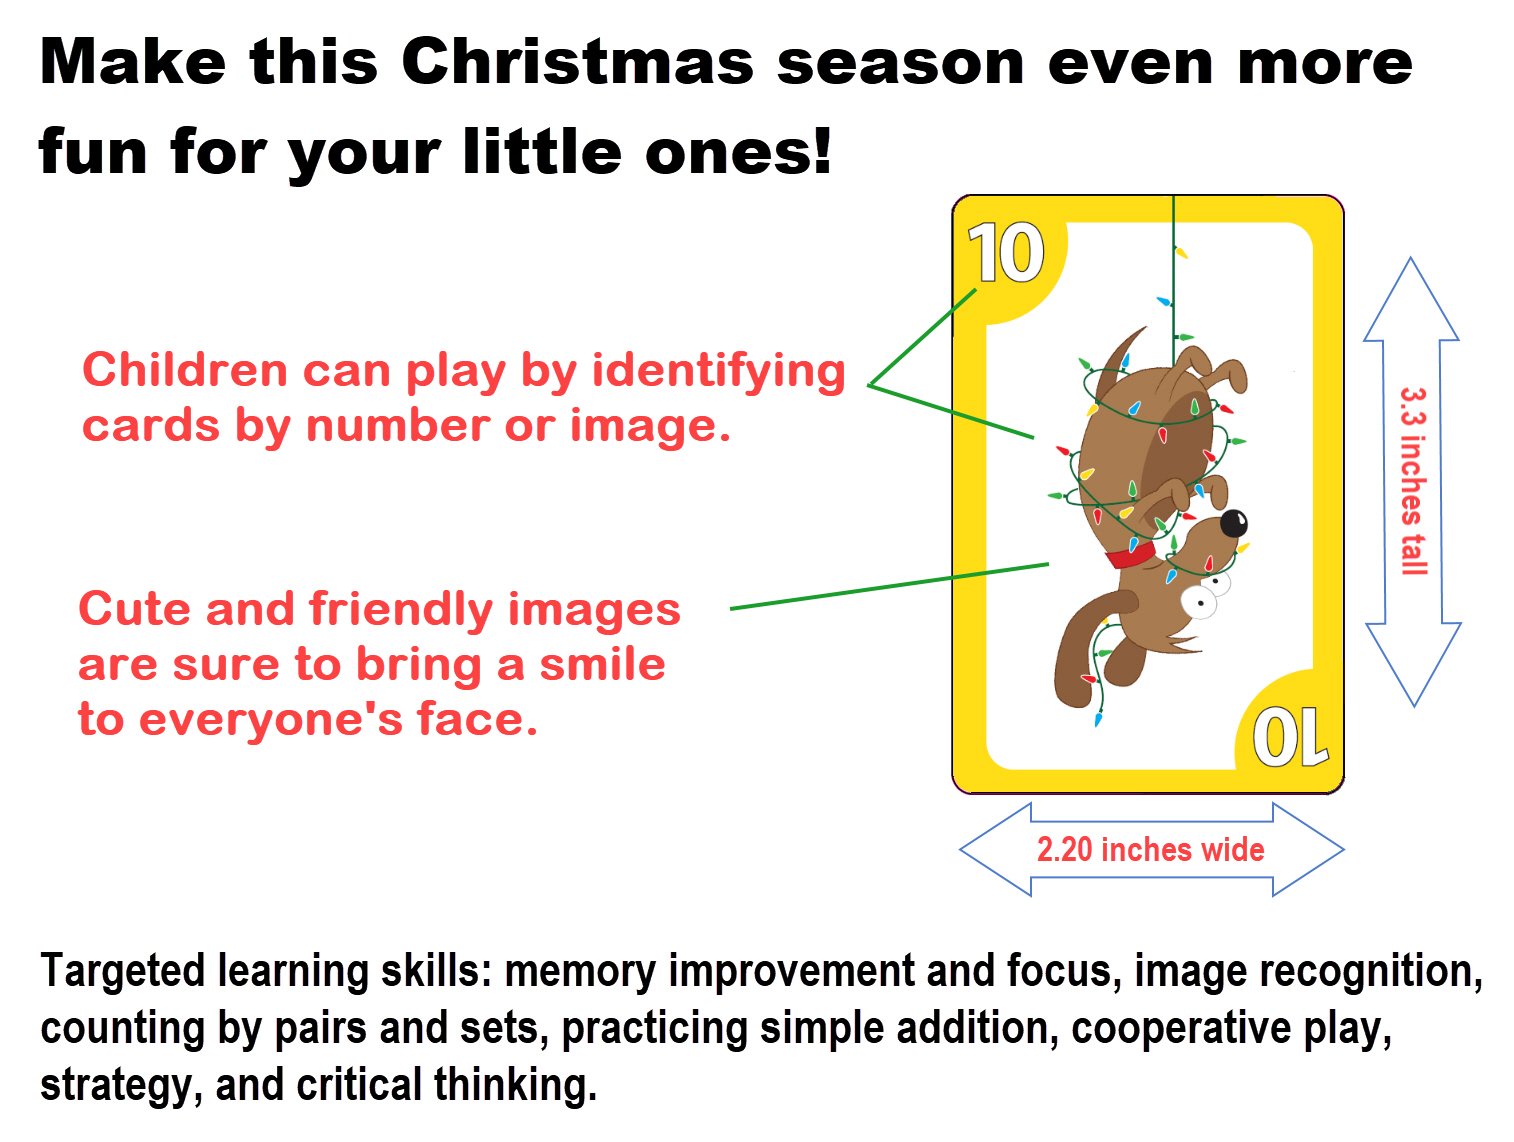 Santa Claus GO Fish, a Christmas Card Game for Kids (GO Fish, Old Maid, and Slap Jack), Play 3 Classic Kids Games Using ONE Holiday Themed Deck, Ideally Sized for Use as Stocking Stuffers